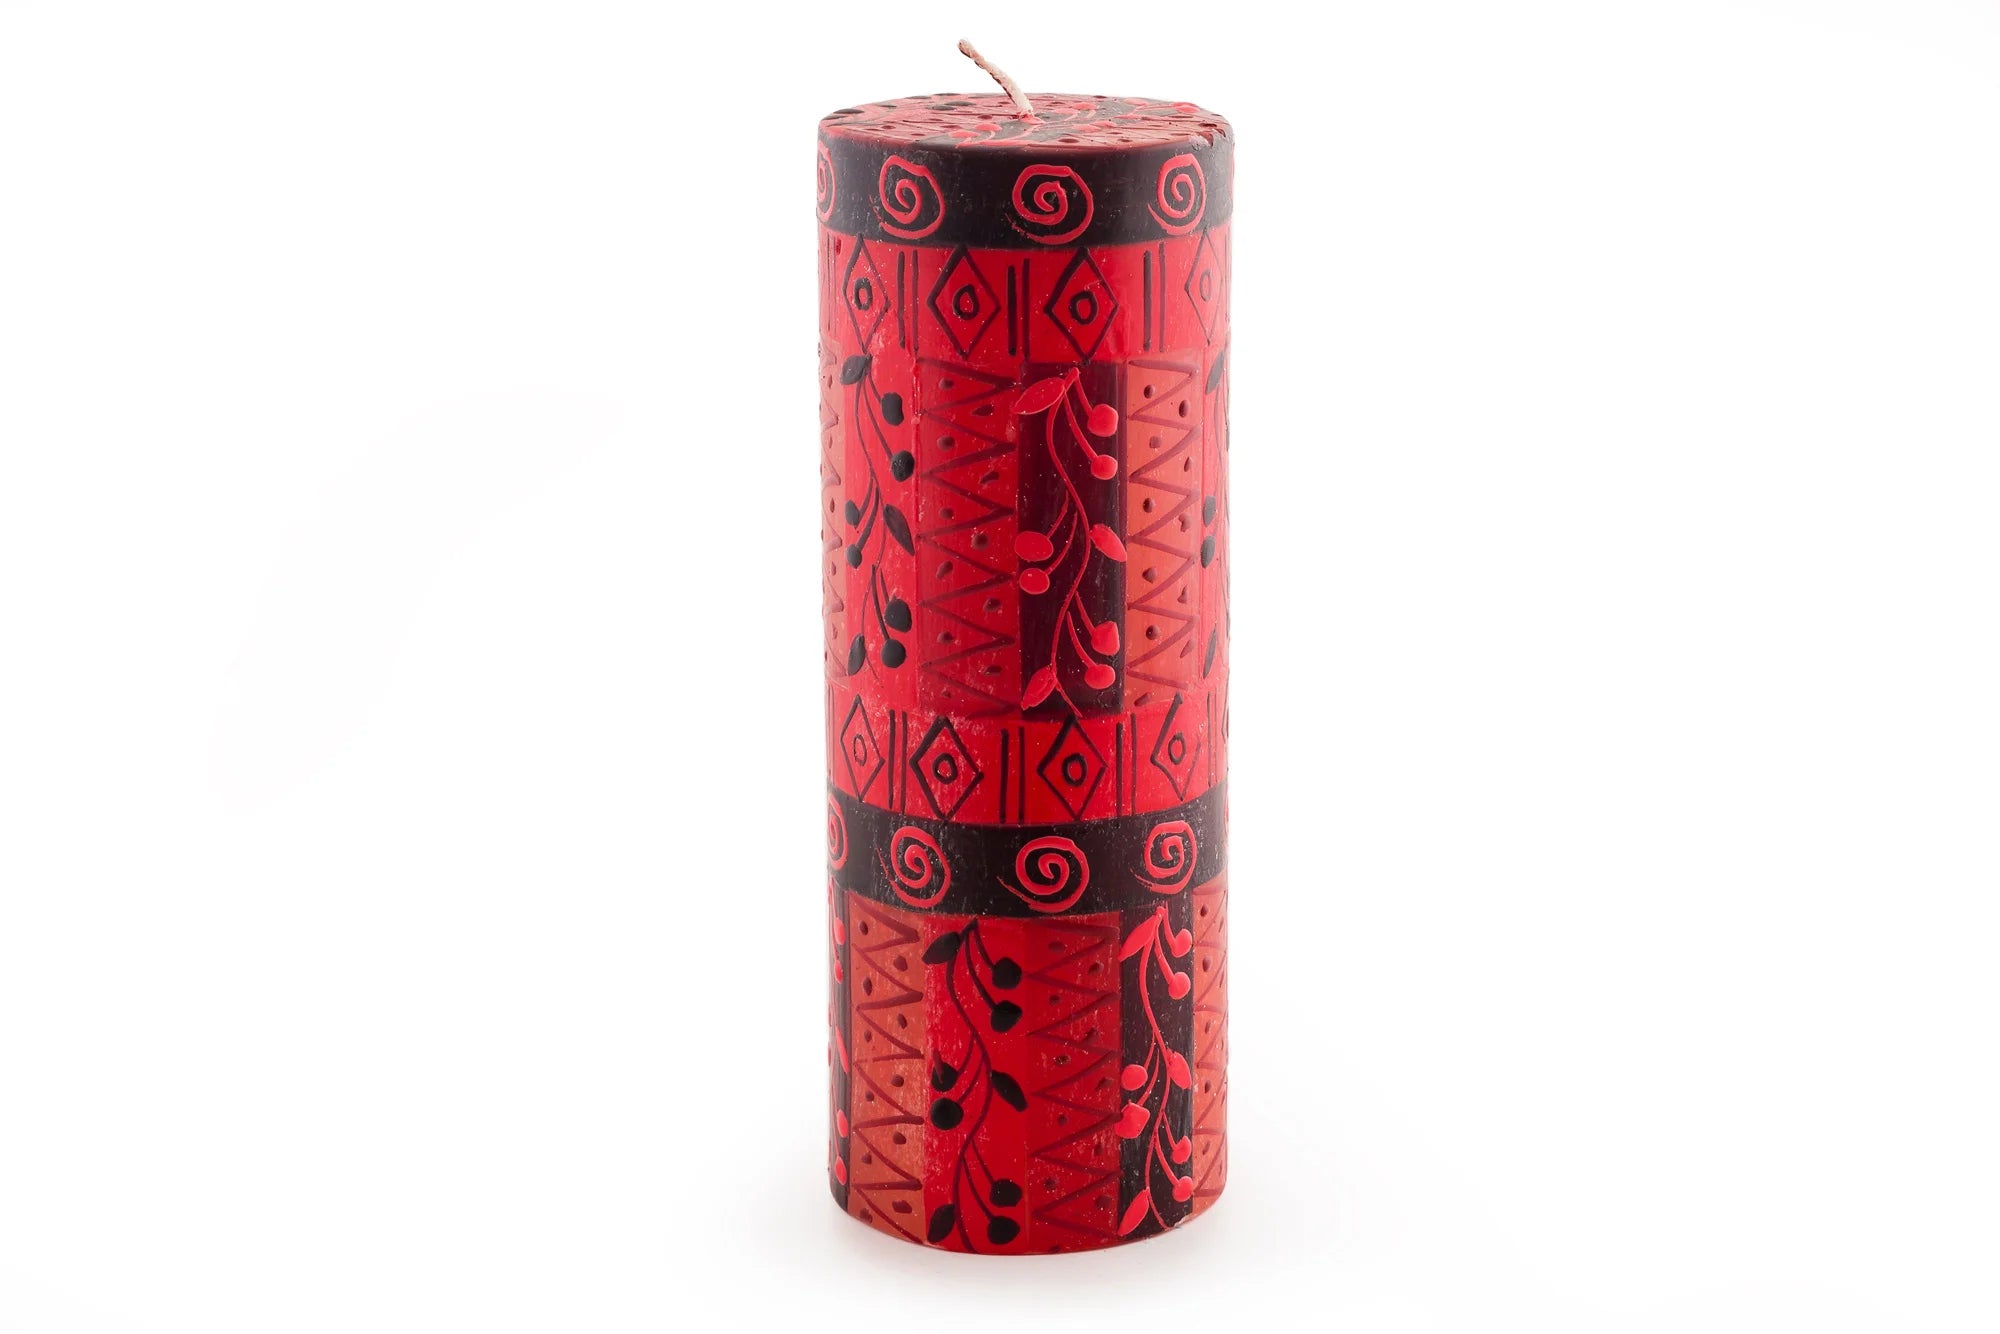 3" x 8" Berry Blaze pillar candle. Bright red with darker berry design mixed with geometric design.